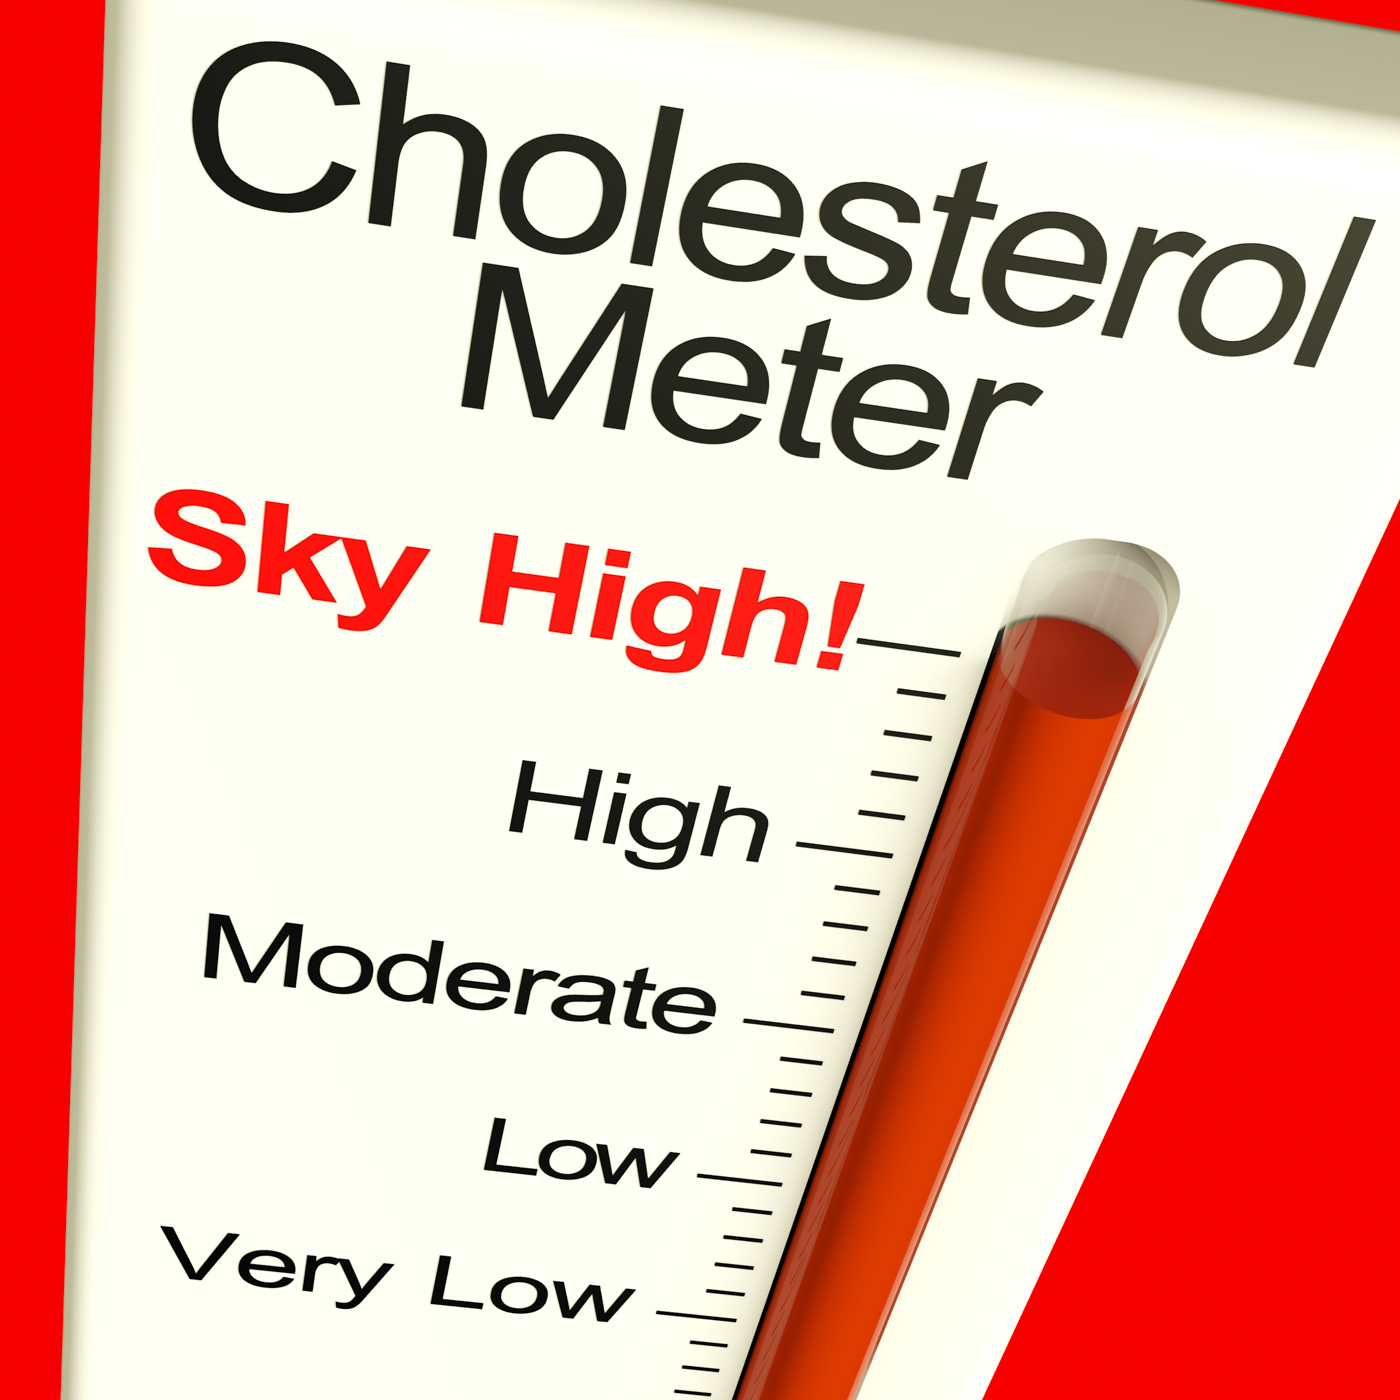 Cholesterol meter high showing unhealthy fatty diet photo